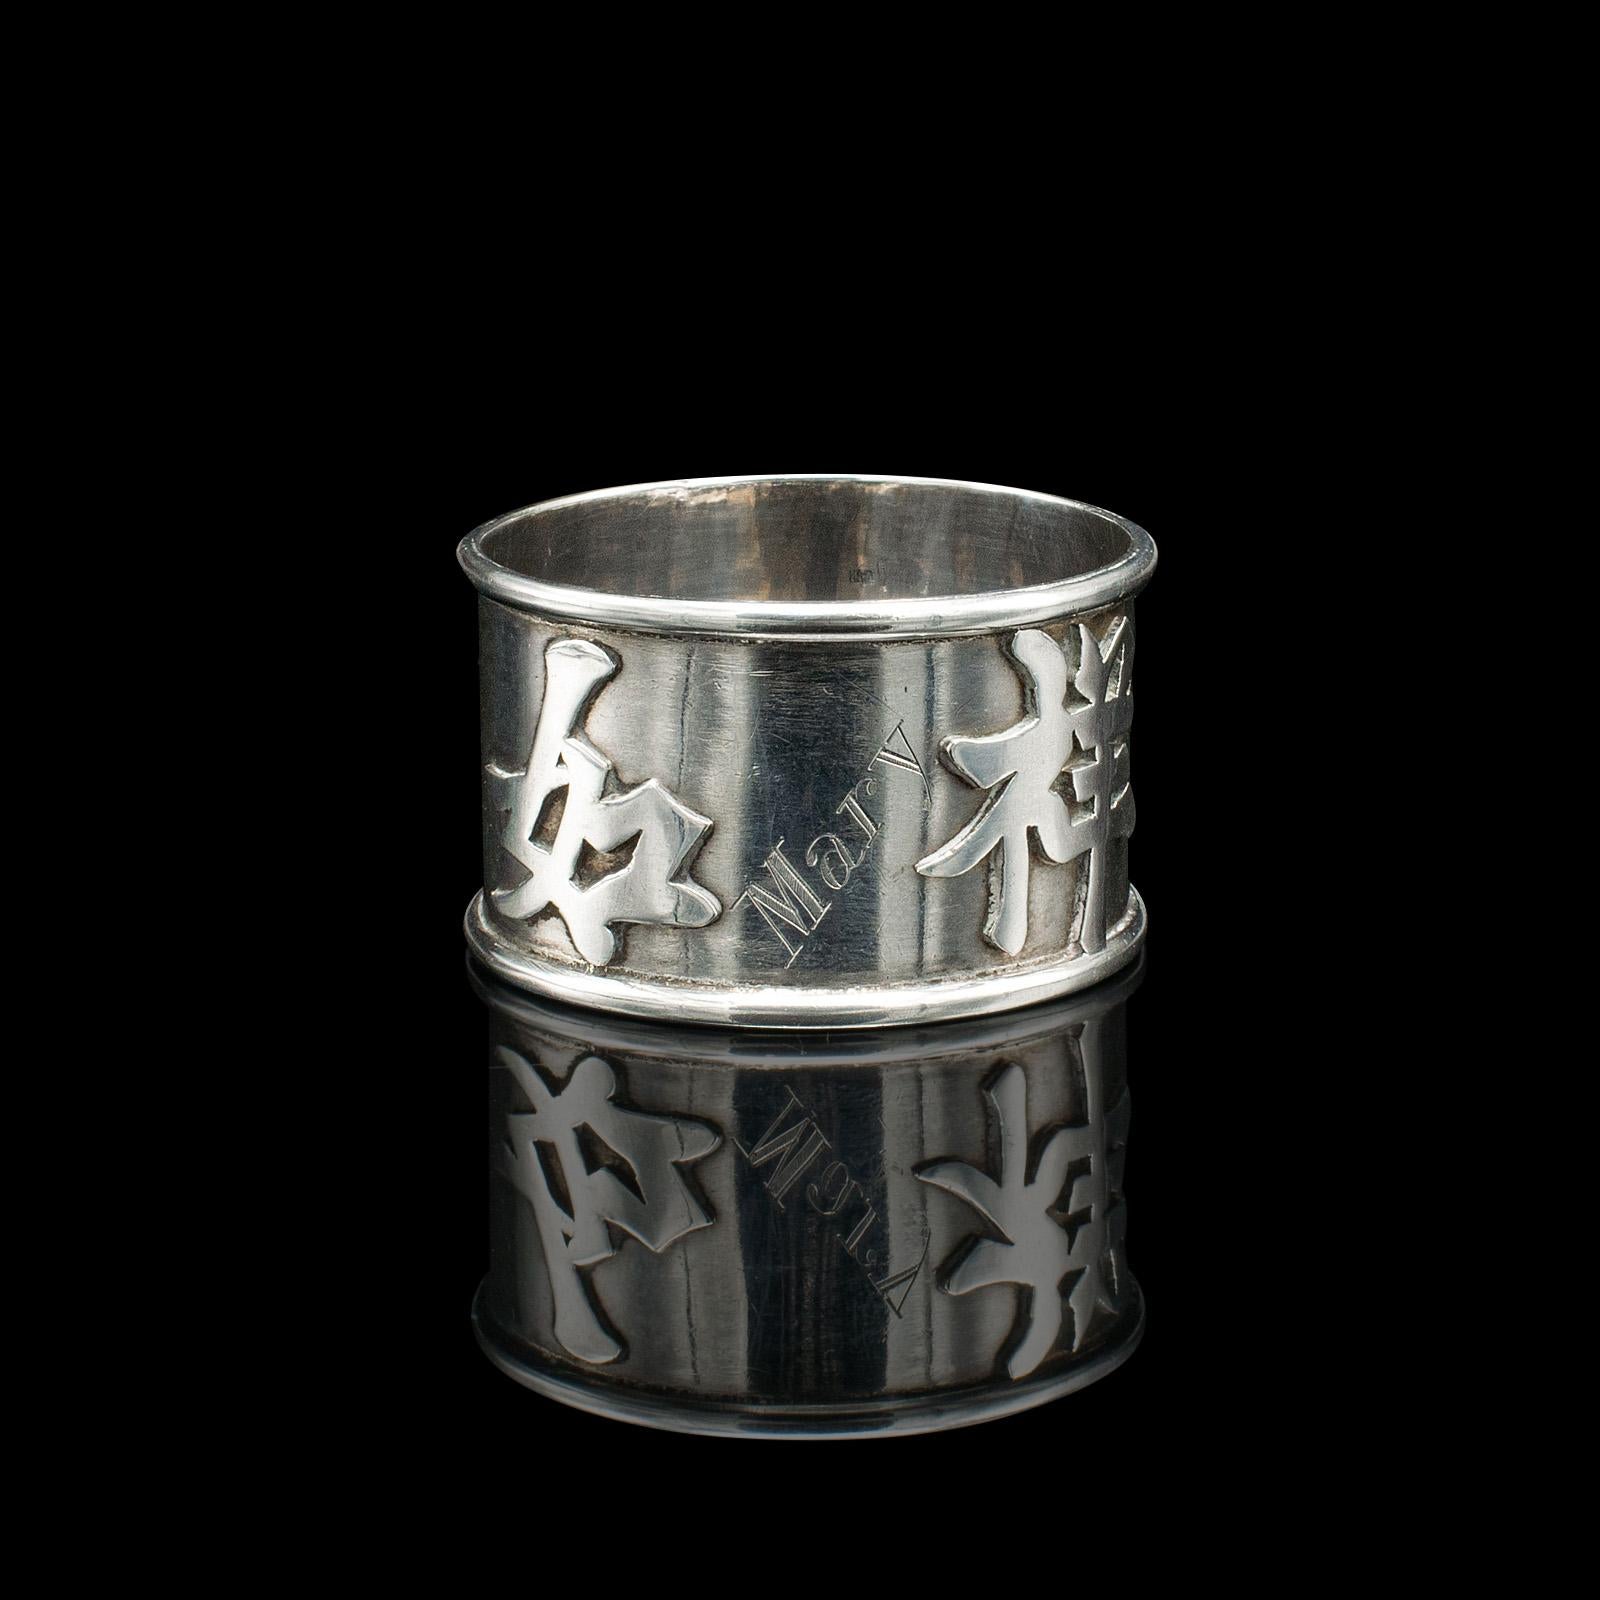 Antique Napkin Ring, Chinese, Silver, Table Decor, Hallmark, Victorian, C.1900 In Good Condition For Sale In Hele, Devon, GB